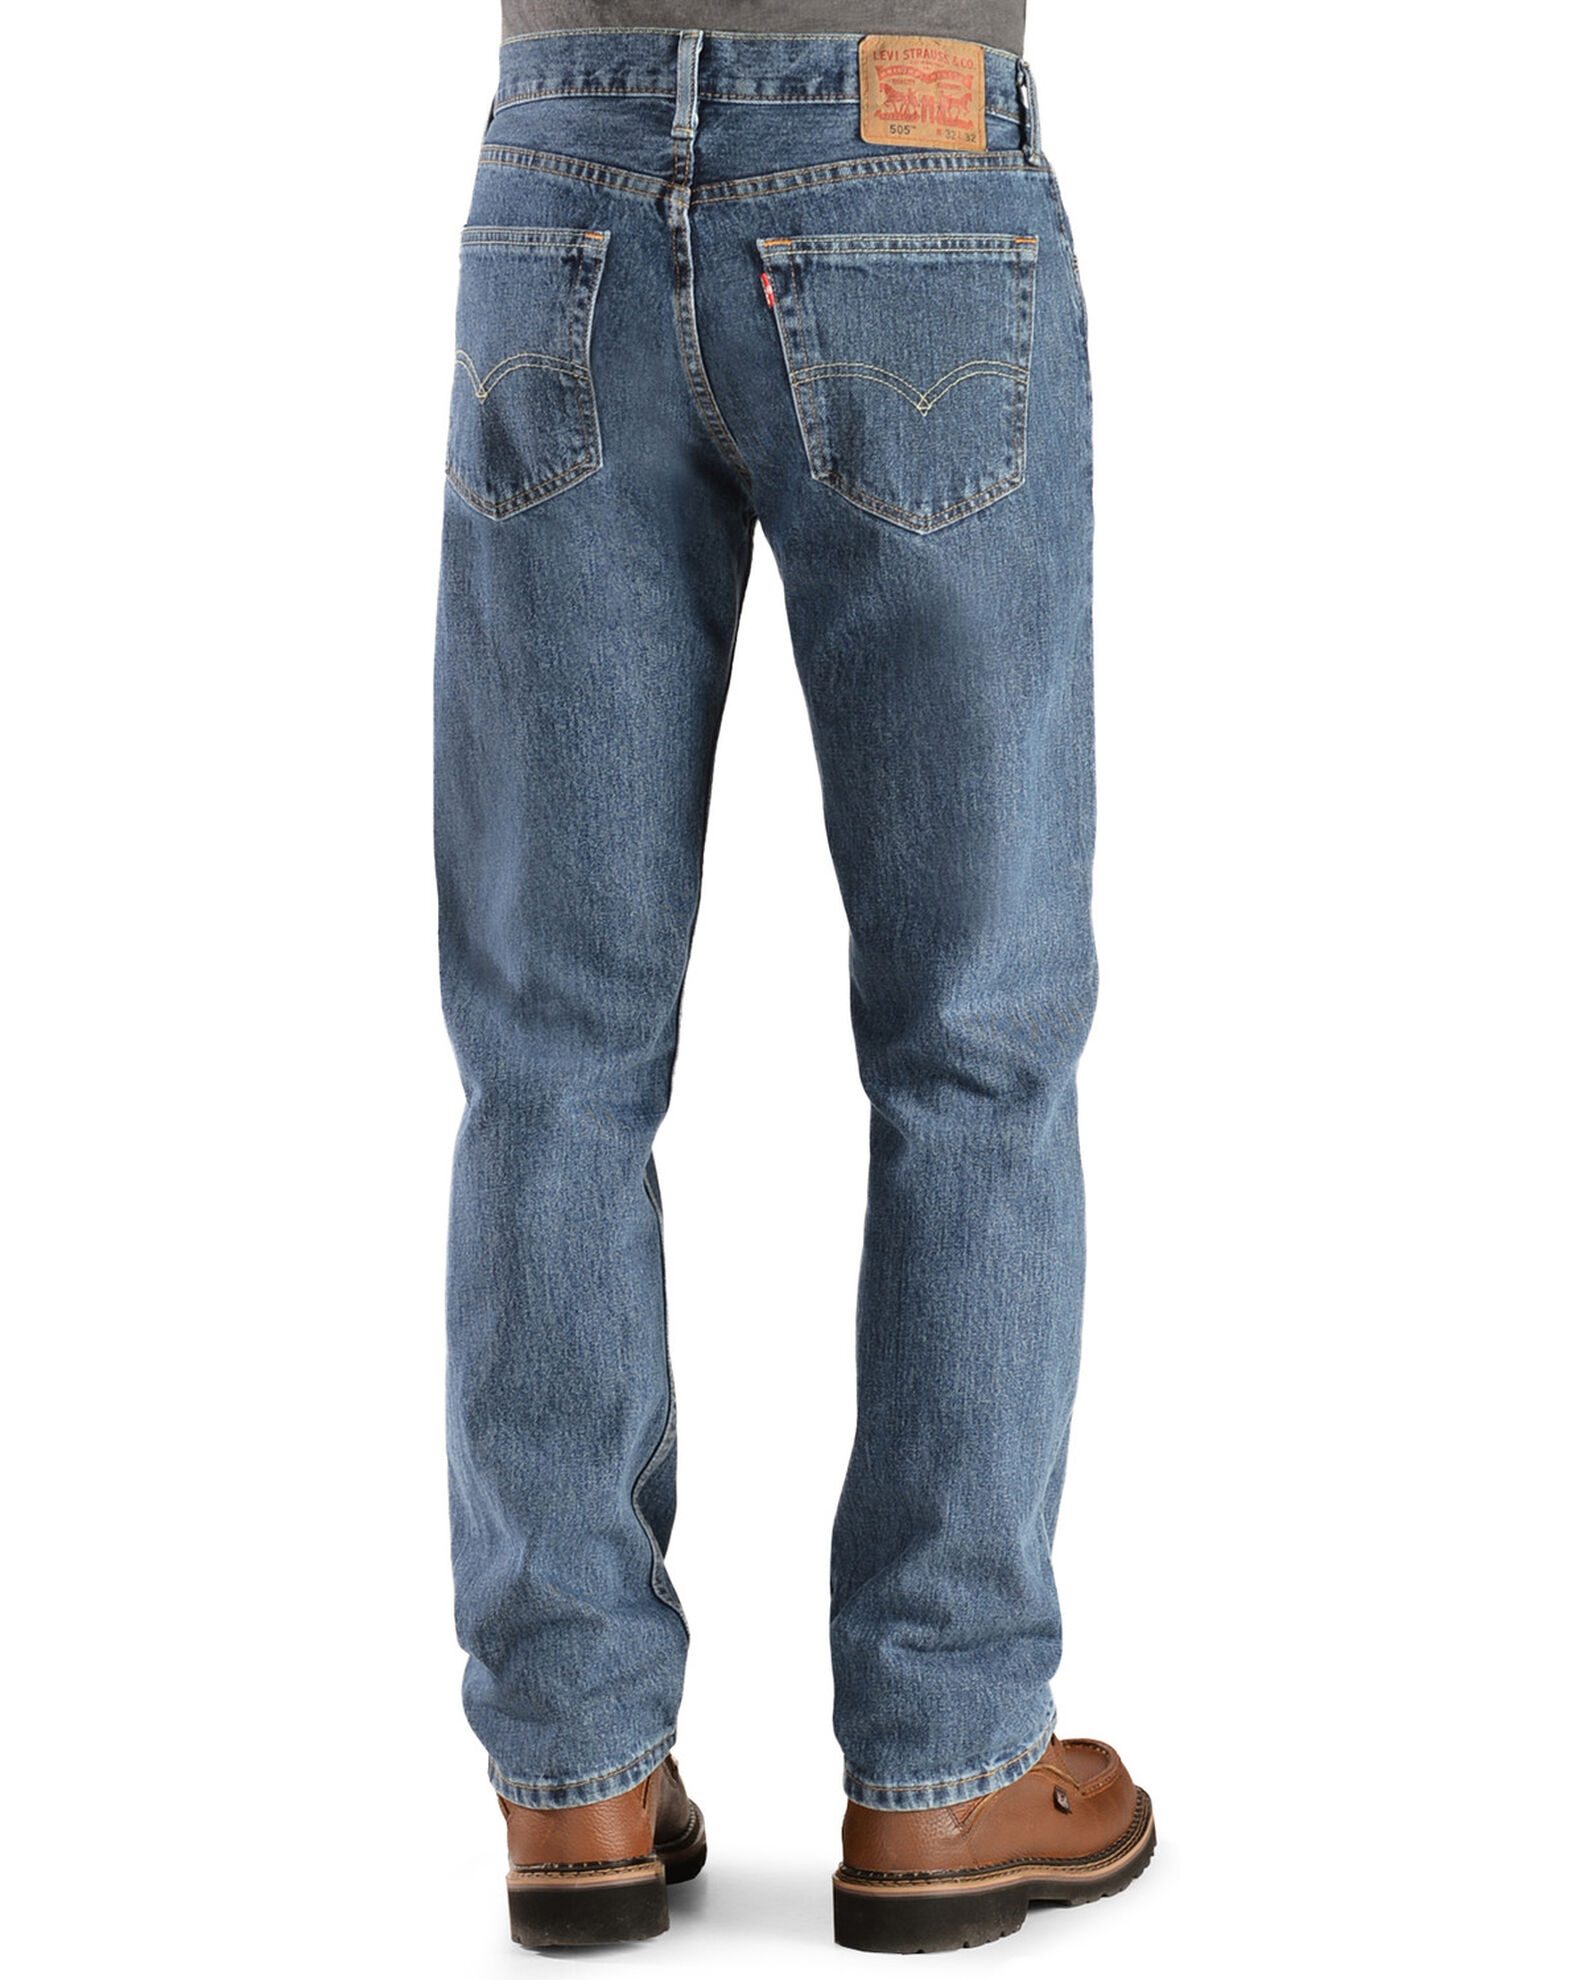 Levi's Men's 505 Prewashed Regular Straight Leg Jeans - Country Outfitter